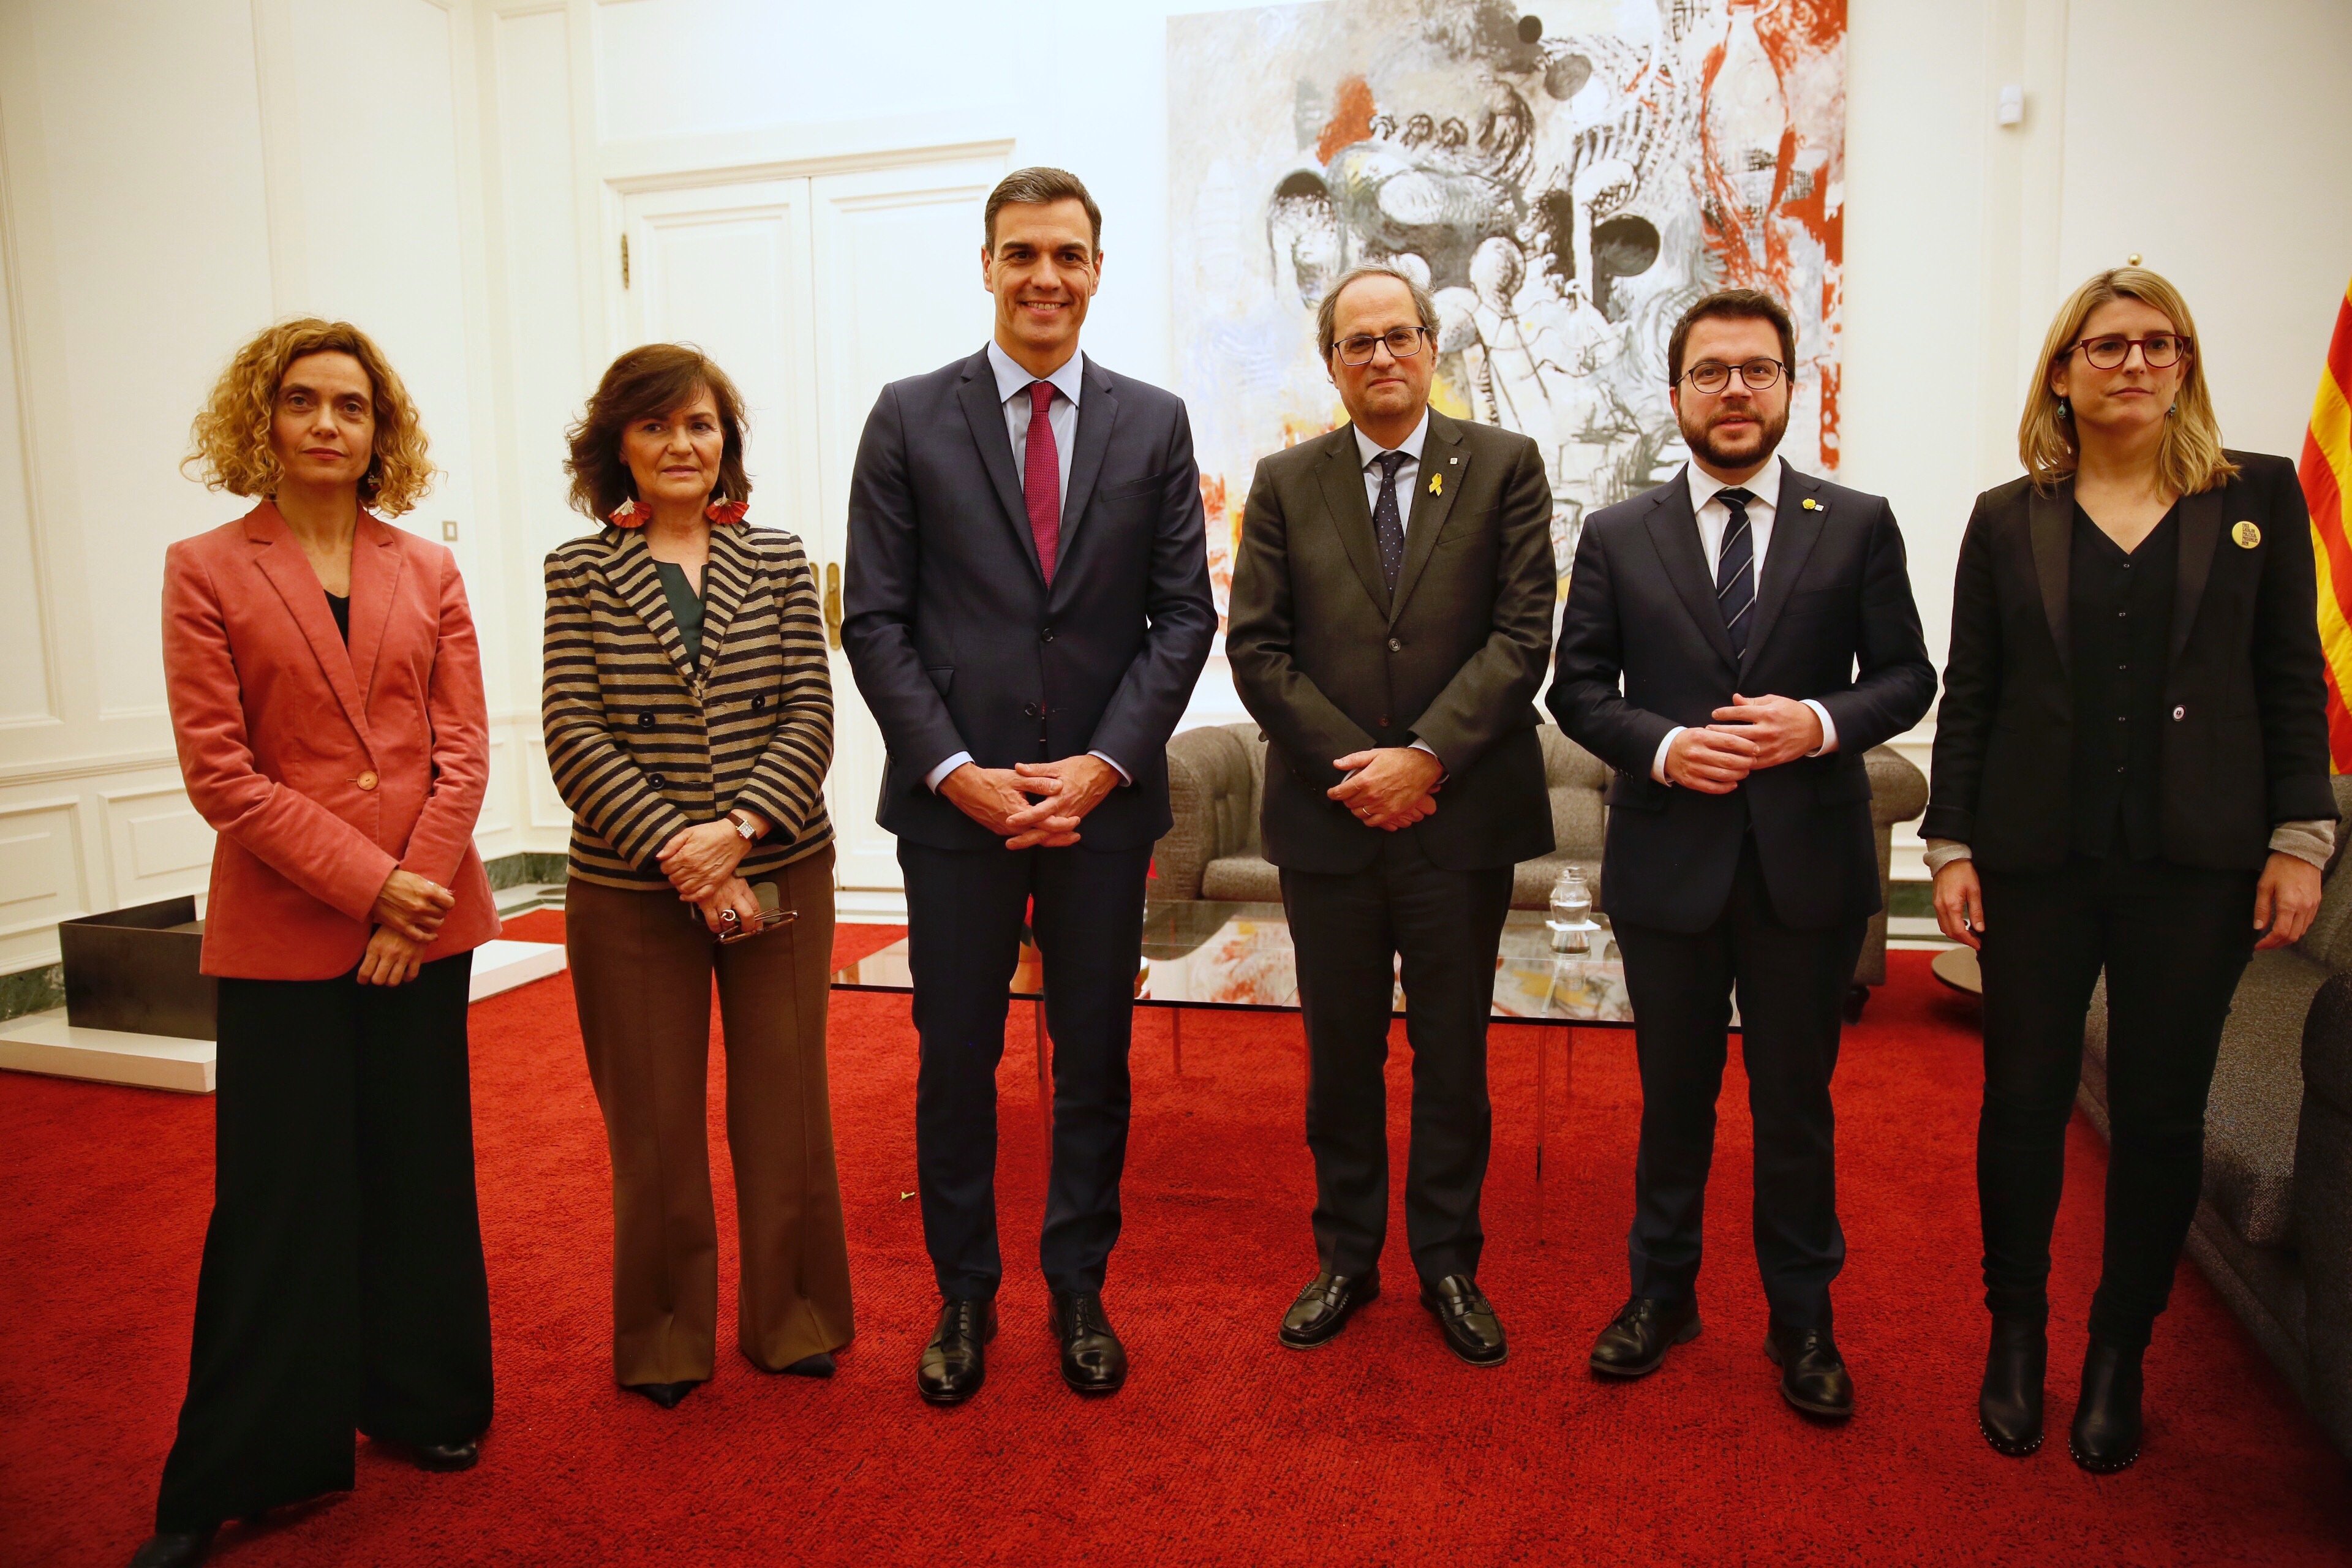 Sánchez and Torra agree on the existence of a conflict and the need for dialogue